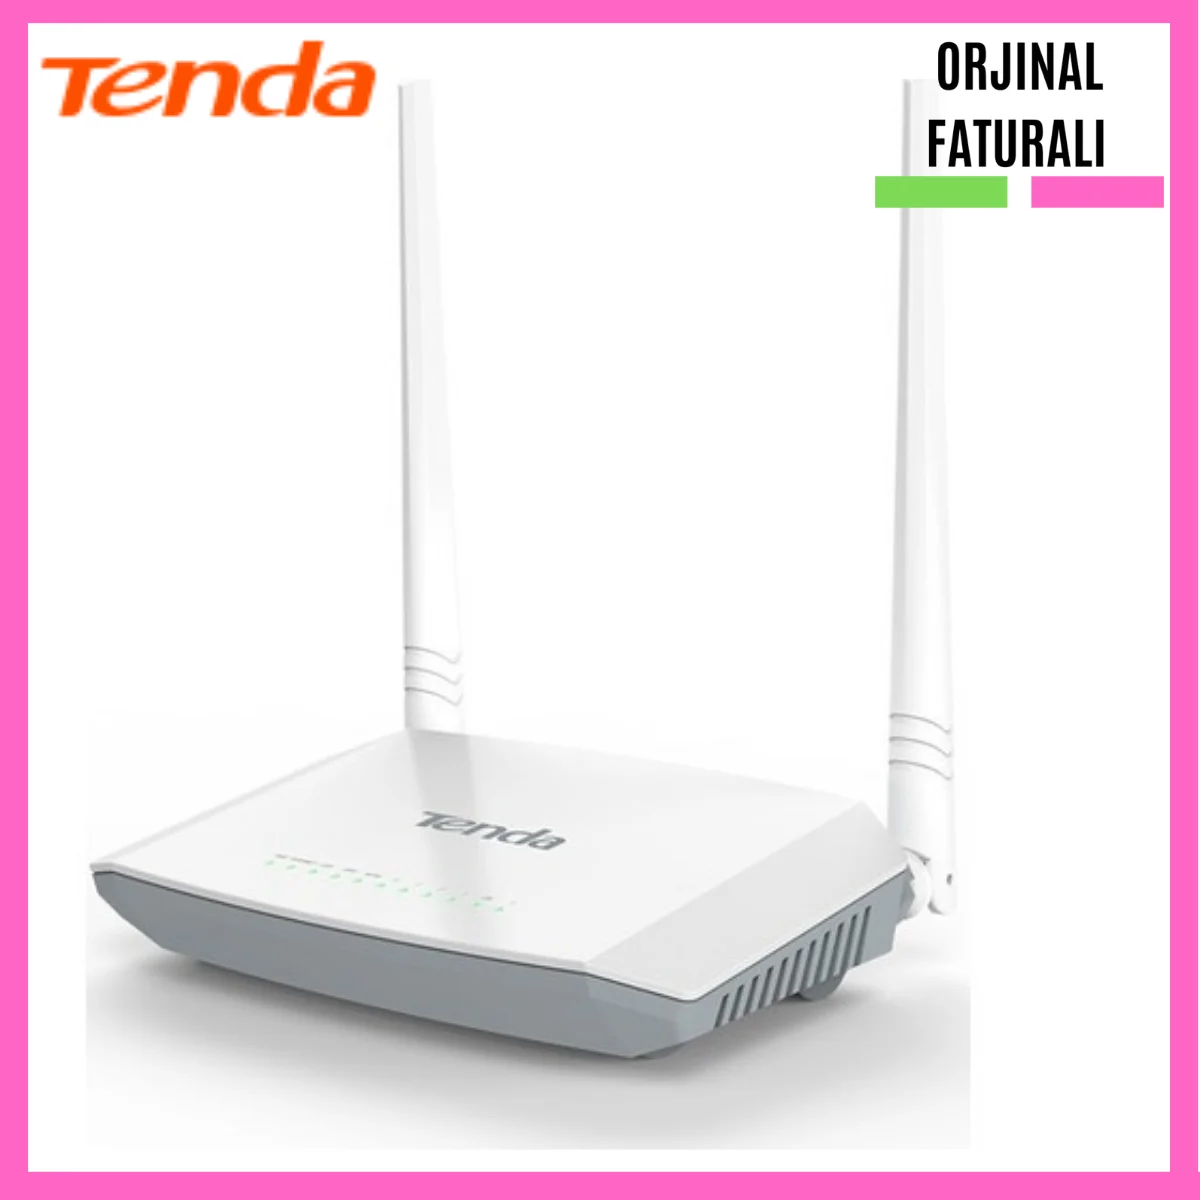 Tenda D301 300Mbps Router Modem Wifi Wi-Fi Repeater Network Home Routers  ADSL2 + Modem Router Usb English Firmware _ - AliExpress Mobile